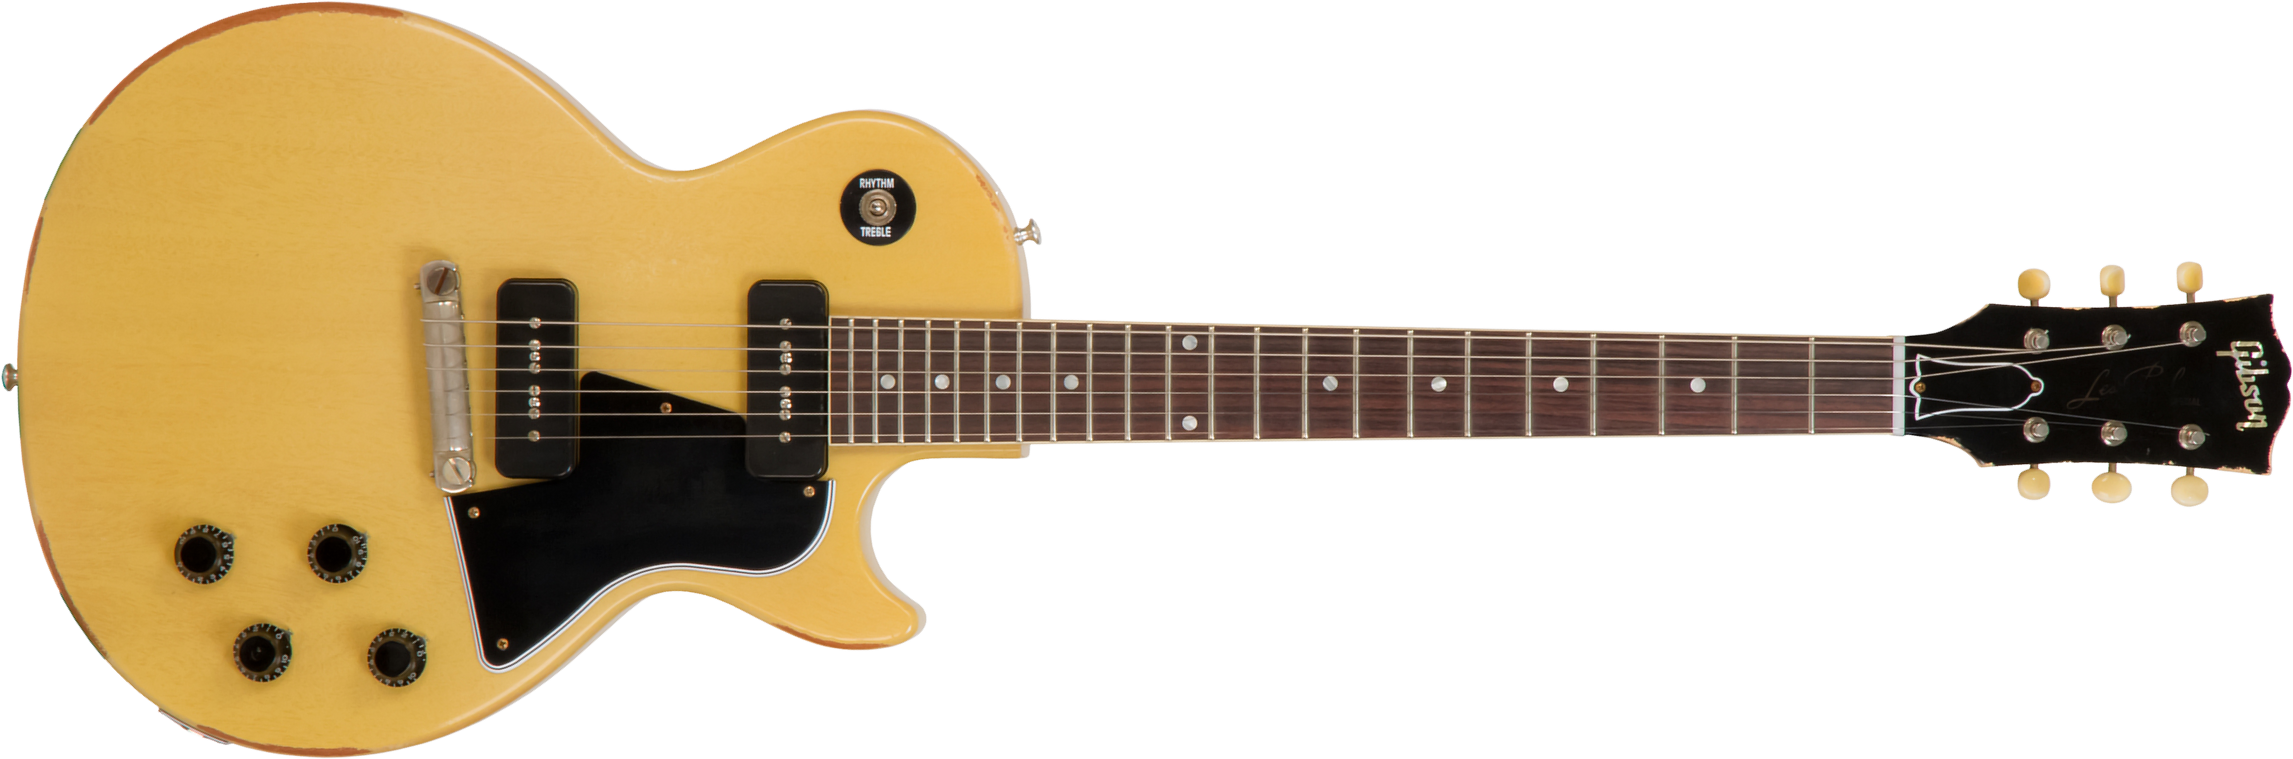 Gibson Custom Shop M2m Les Paul Special 1957 Single Cut Reissue P90 Ht Rw #70811 - Heavy Aged Tv Yellow - Single cut electric guitar - Main picture